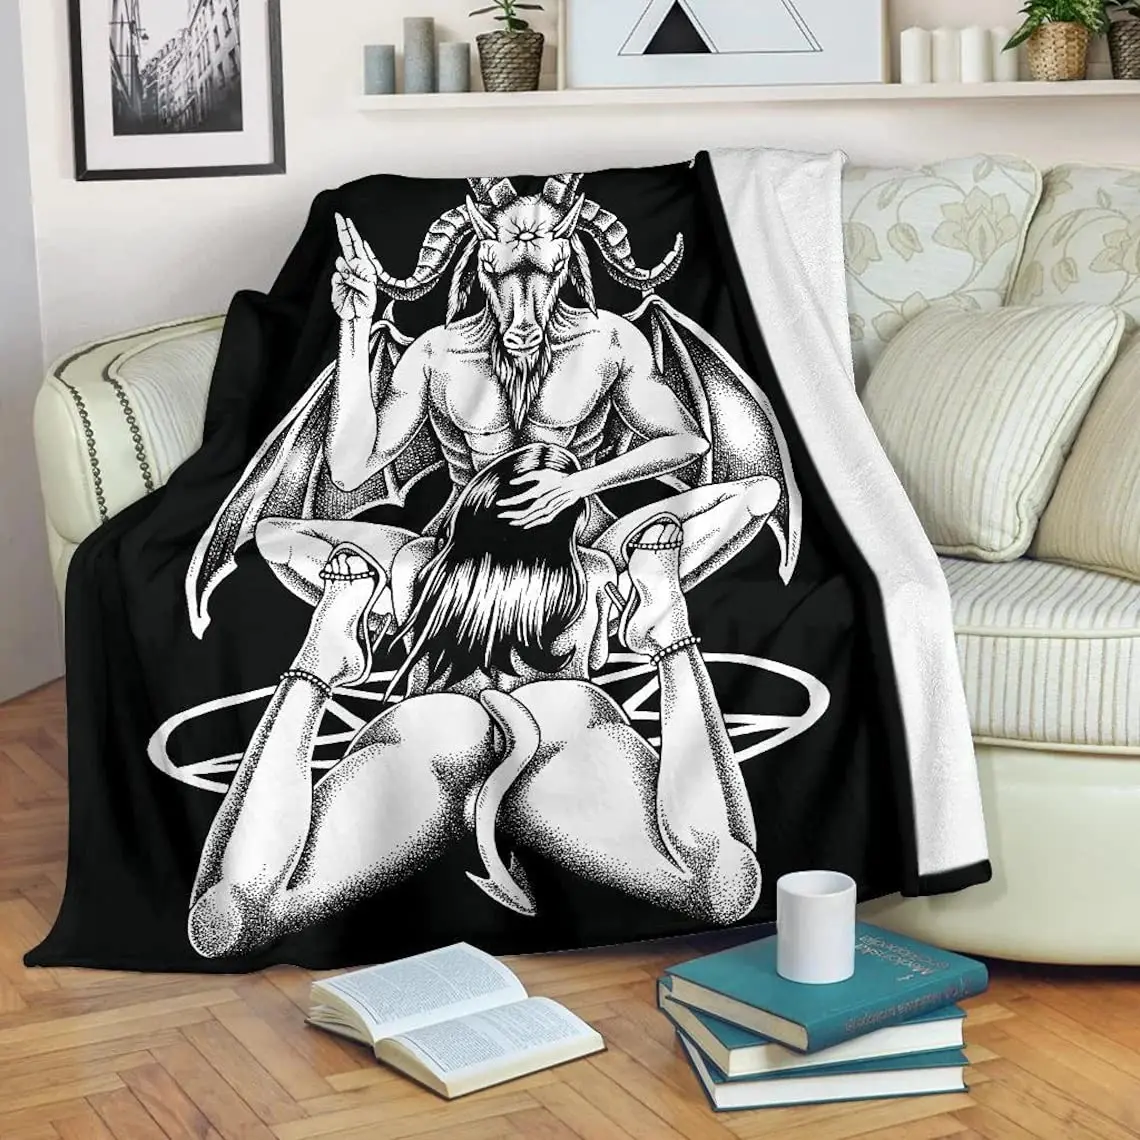 

Baphomet Blanket, Warm Home Soft Cozy Portable Fuzzy Throw for Couch Bed Sofa,Demon Baphomet Satanic Symbol Horror Goat Blankets